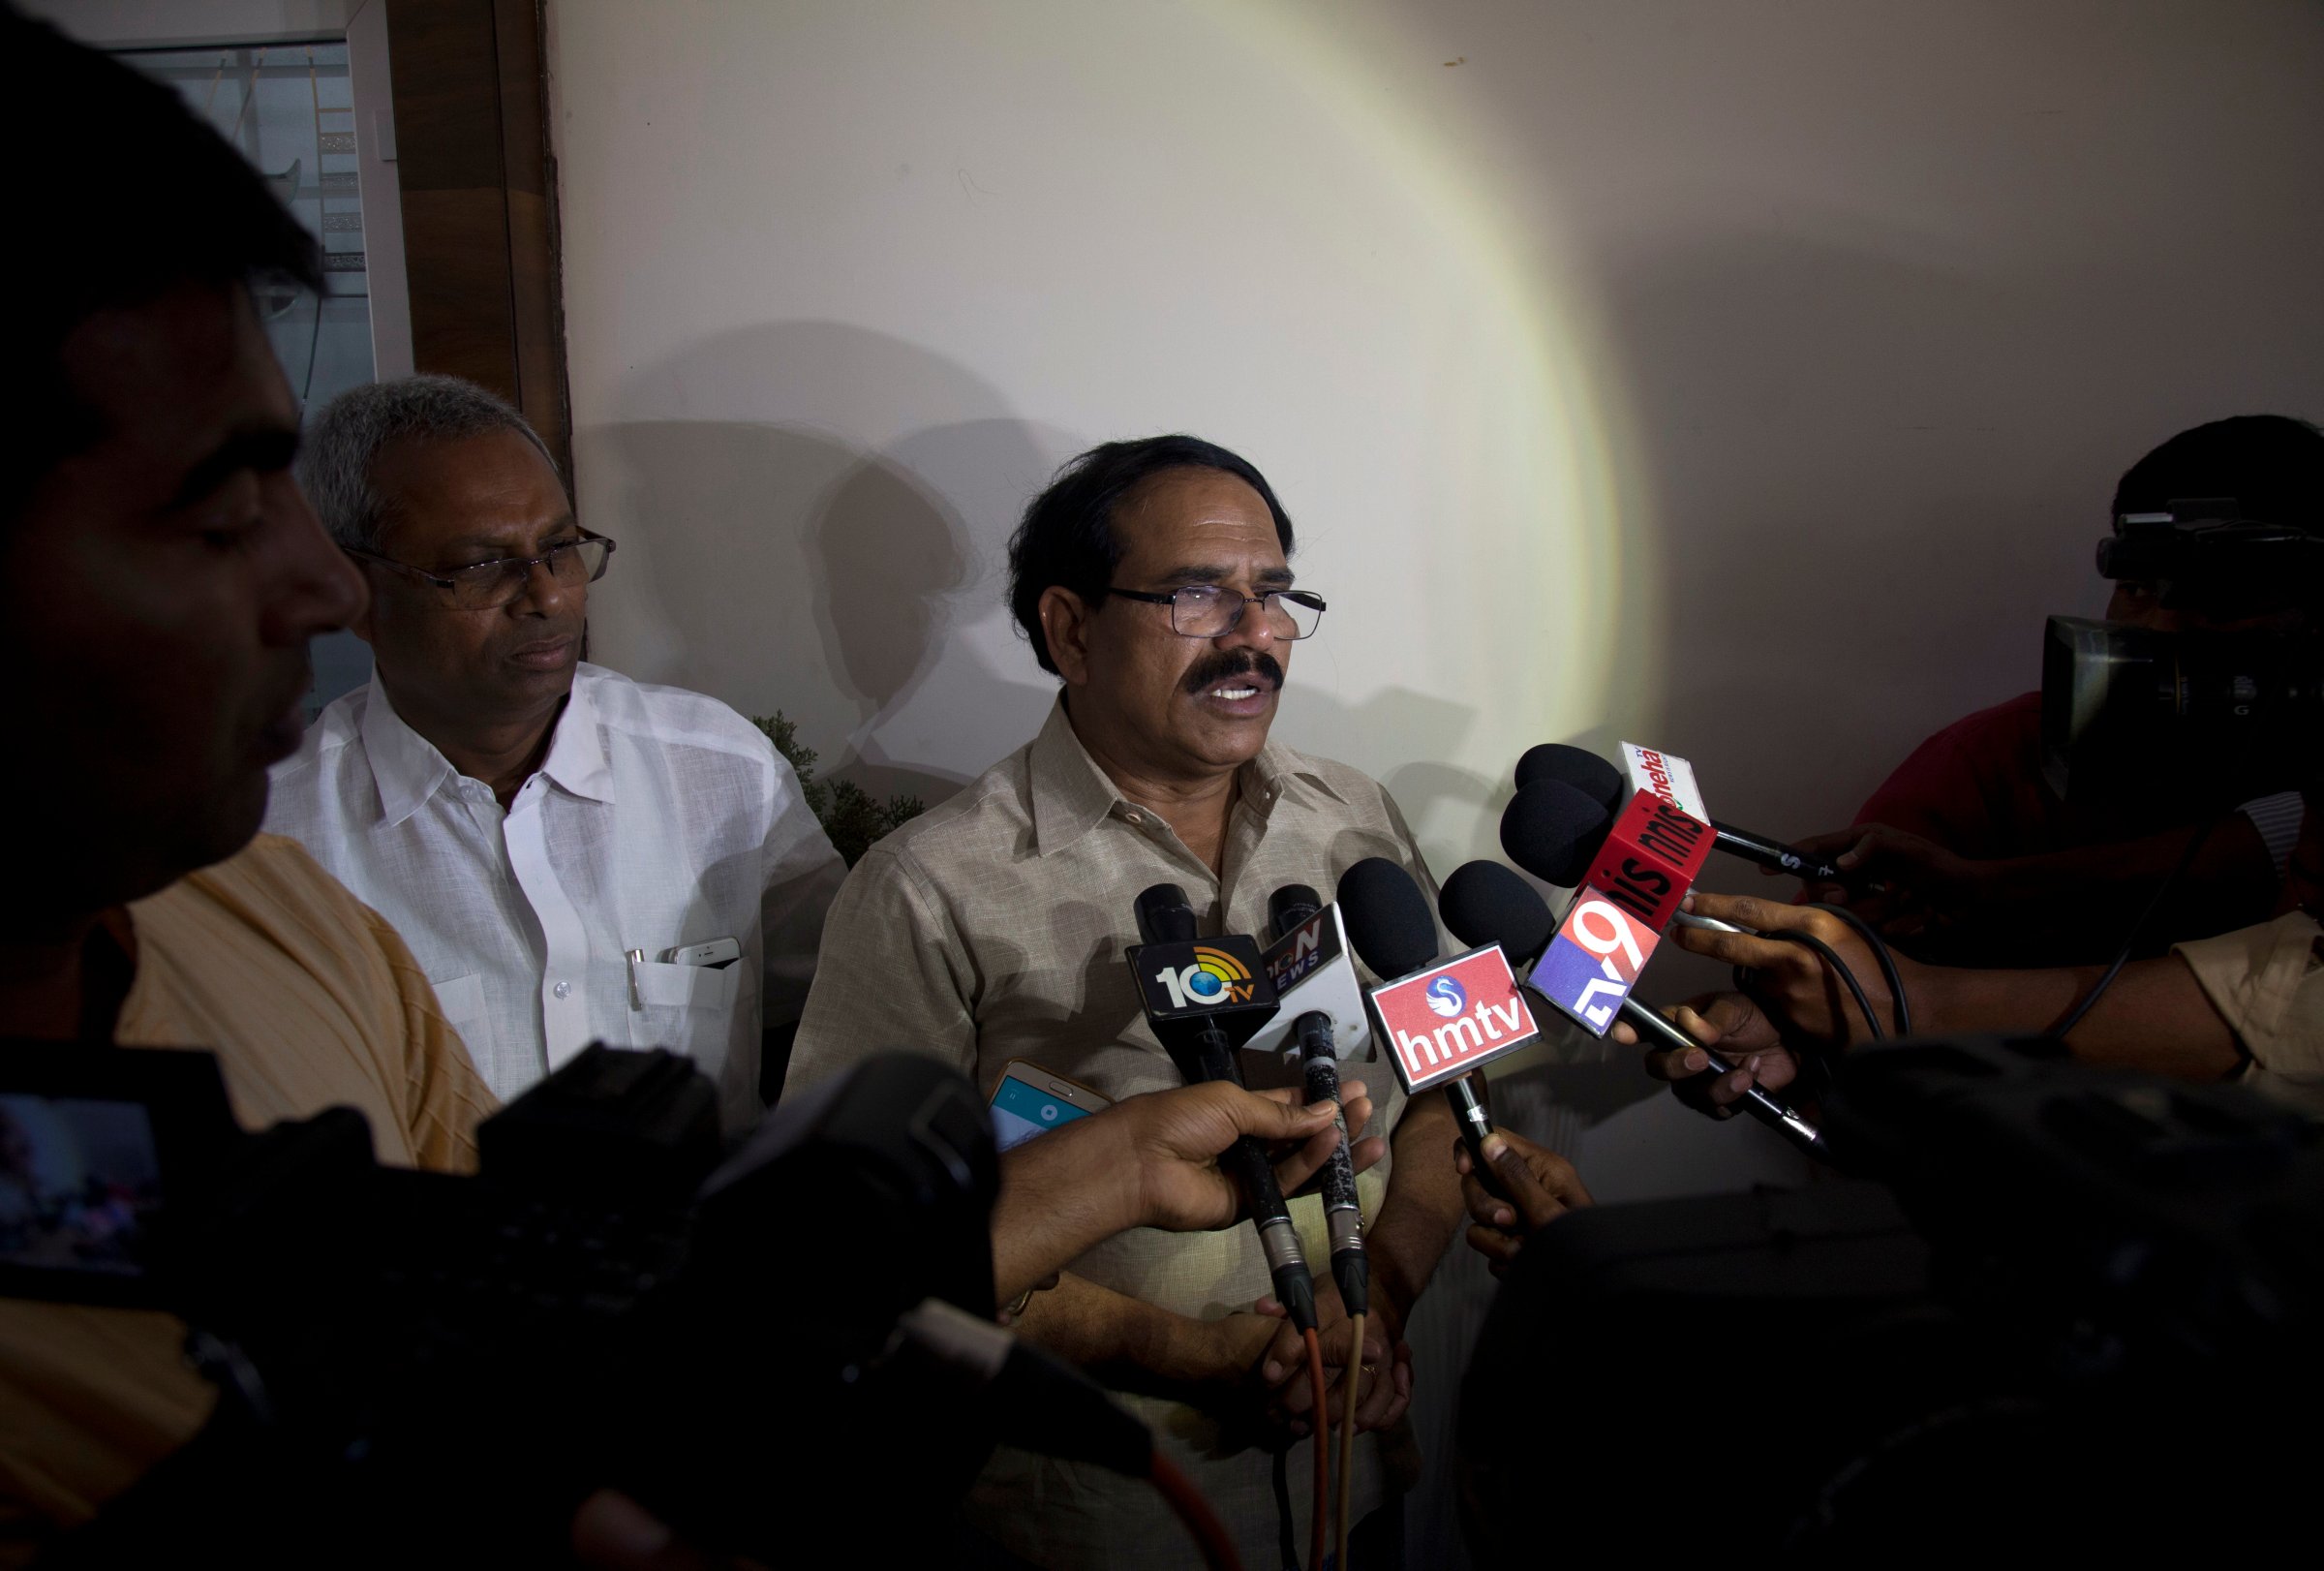 Jaganmohan Reddy, father of Alok Madasani, an engineer who was injured in the shooting Wednesday night in a crowded suburban Kansas City bar, speaks to the media at his residence in Hyderabad, India, on Feb. 24, 2017.